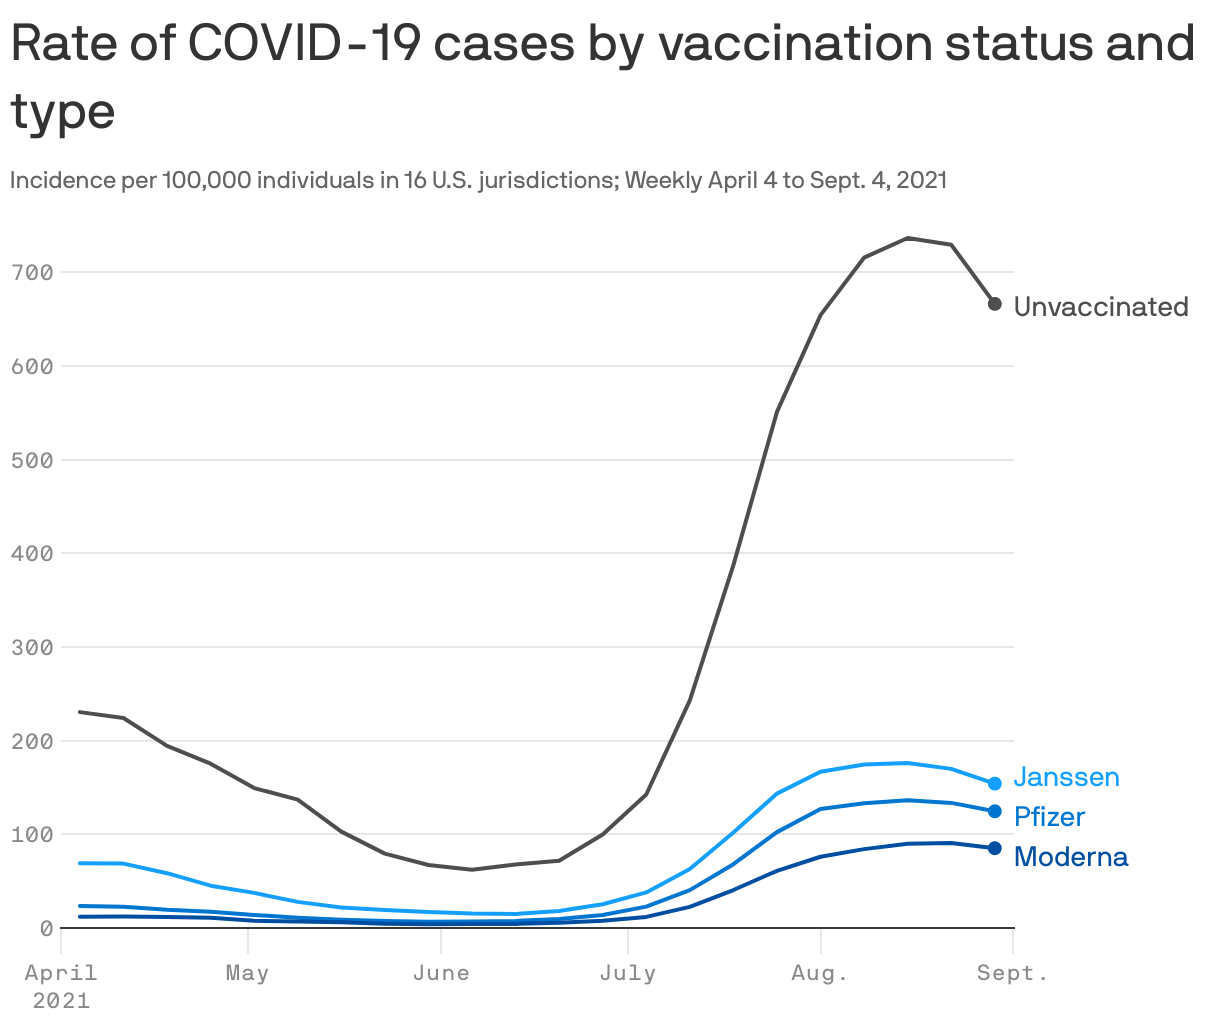 Rate of COVID-19 cases by vaccination status and type